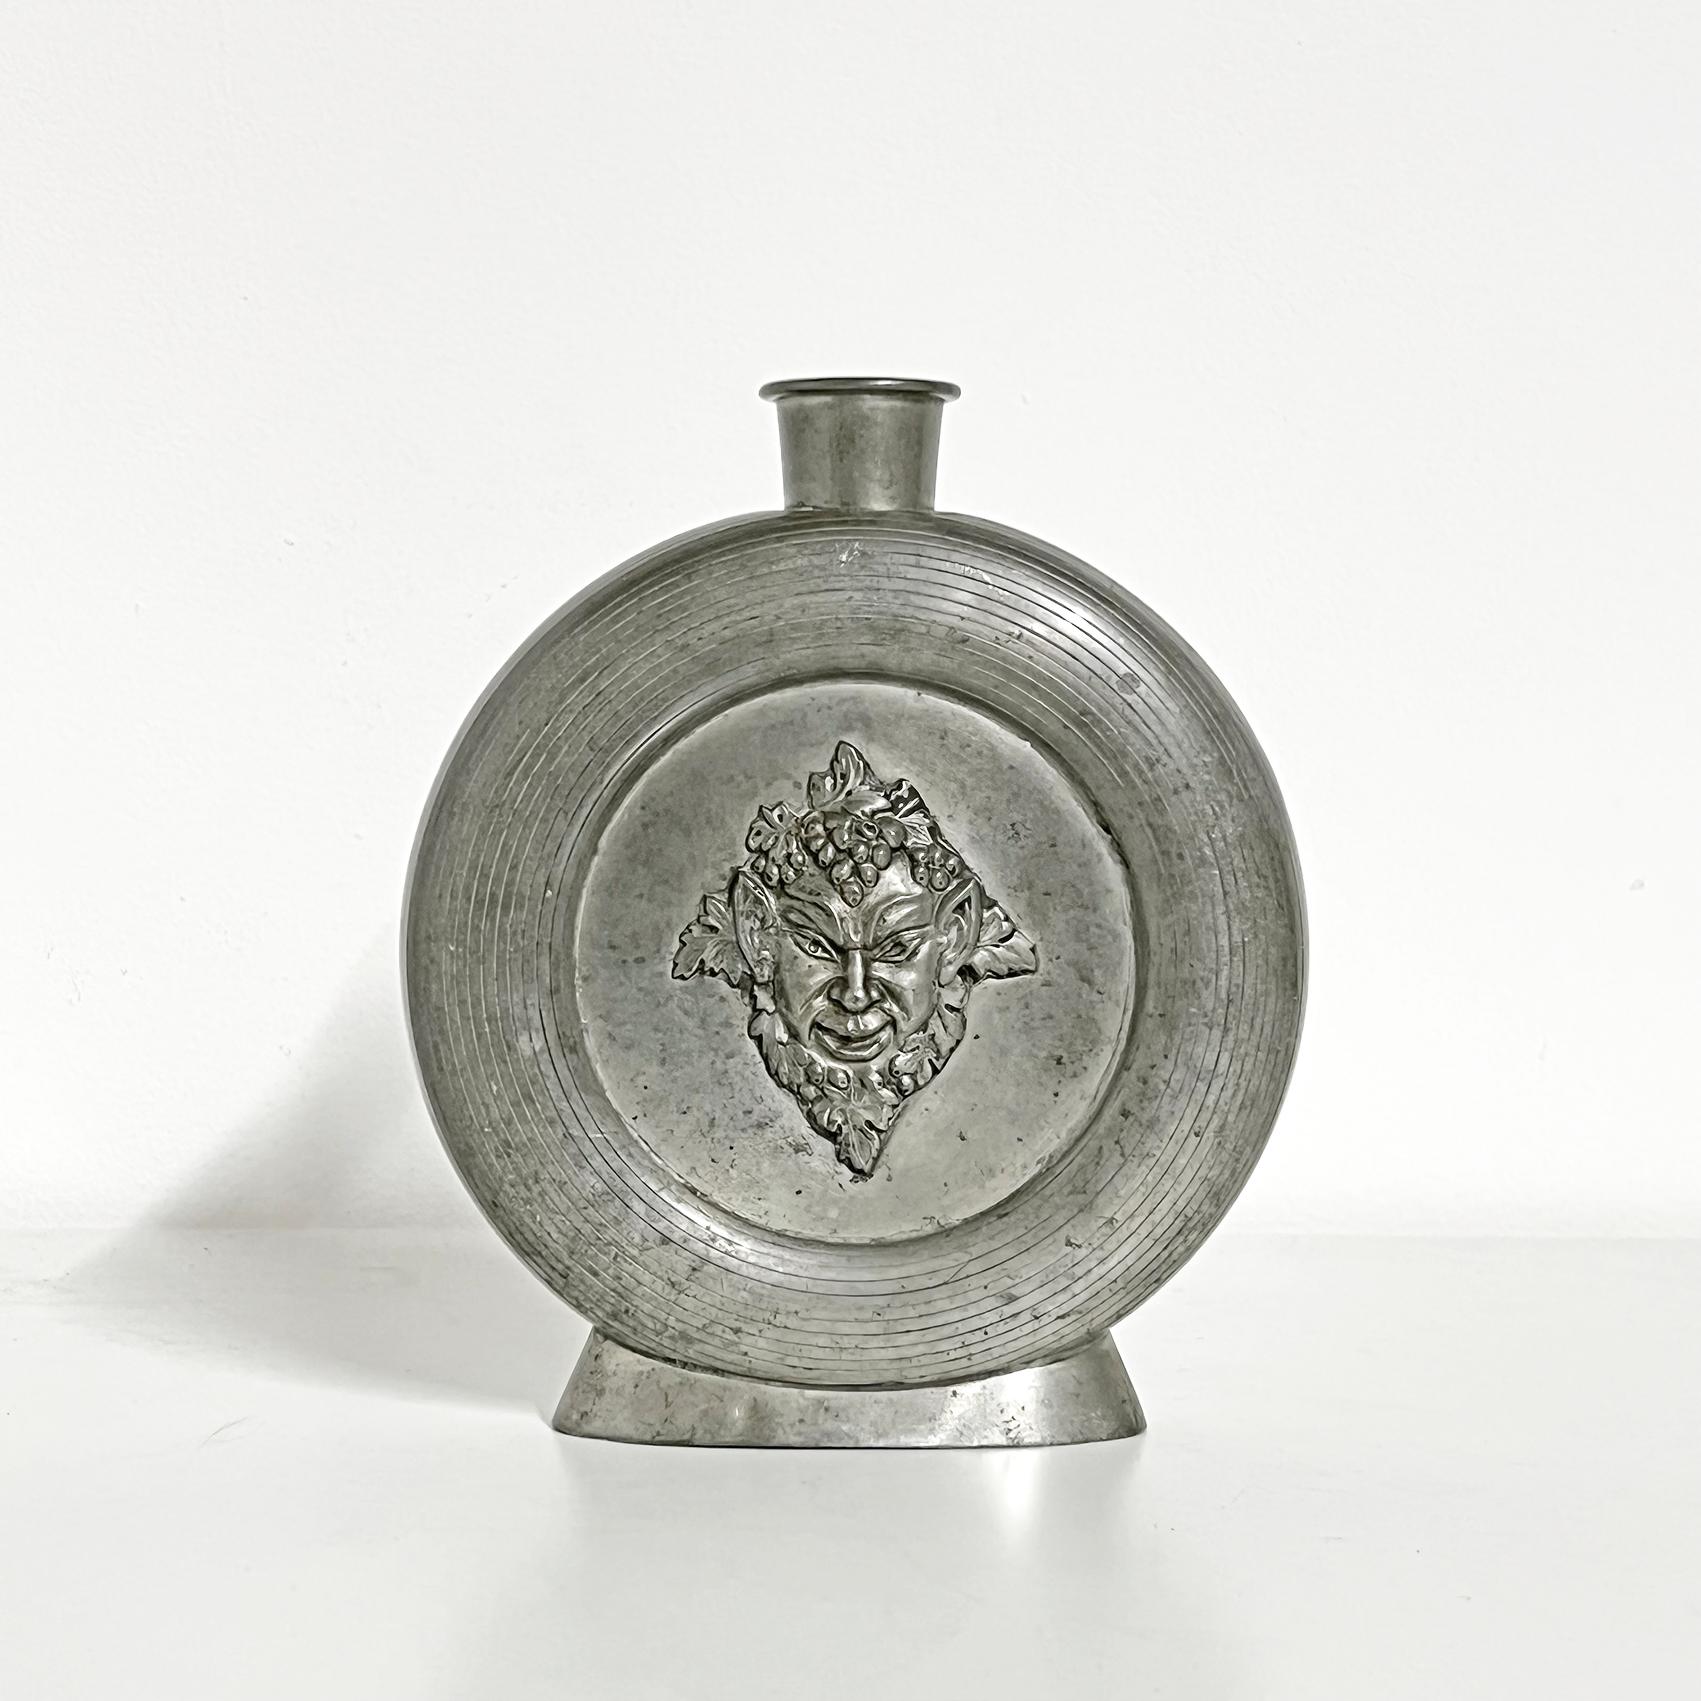 Cool and rare scandinavian modern bottle in pewter depicting Bacchus, by CG Hallberg -1934. 
The bottle stopper is missing. Engraving, as seen on the pictures.
Signed with makers mark underneath. 
Good vintage condition, wear and patina consistent